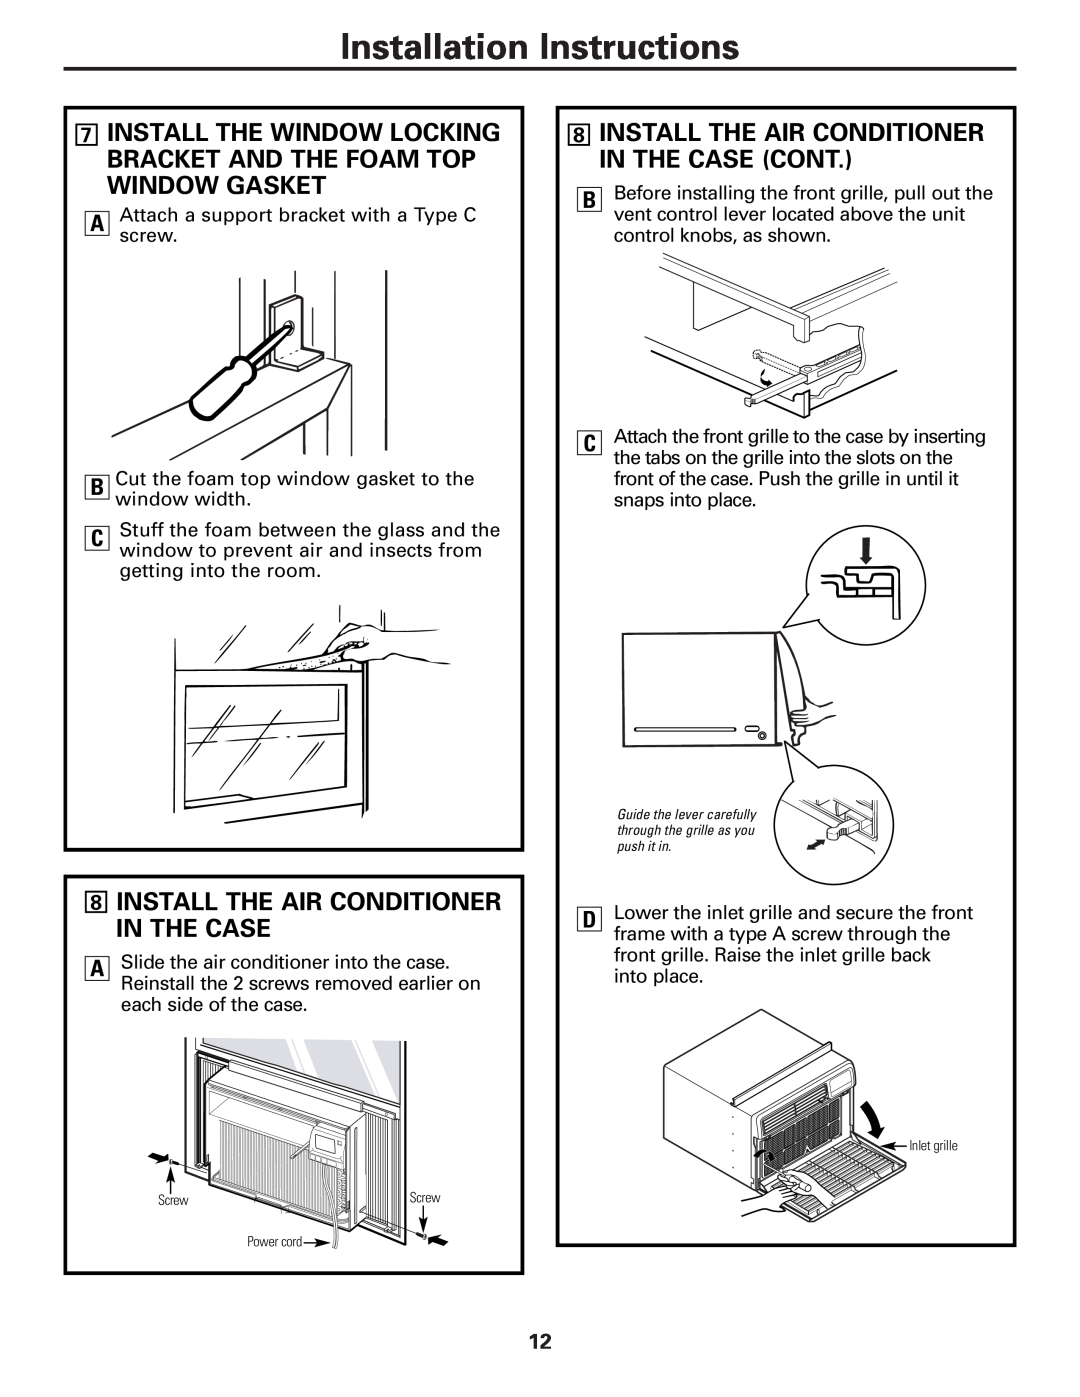 GE AGM24 operating instructions 8INSTALL THE AIR CONDITIONER IN THE CASE CONT, Installation Instructions 